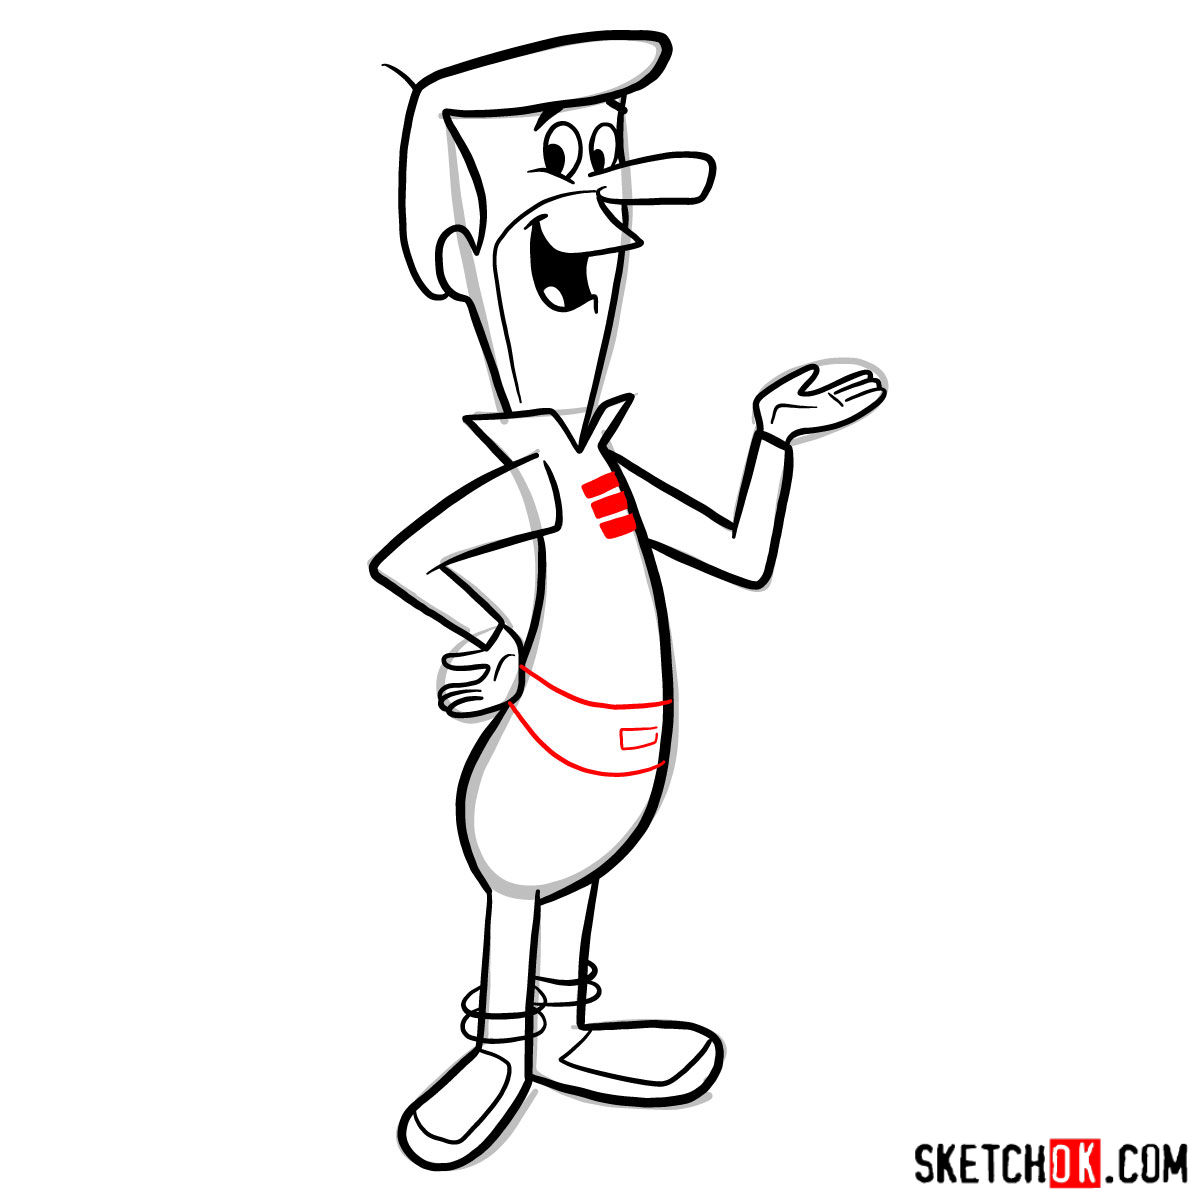 How to draw George Jetson - step 10